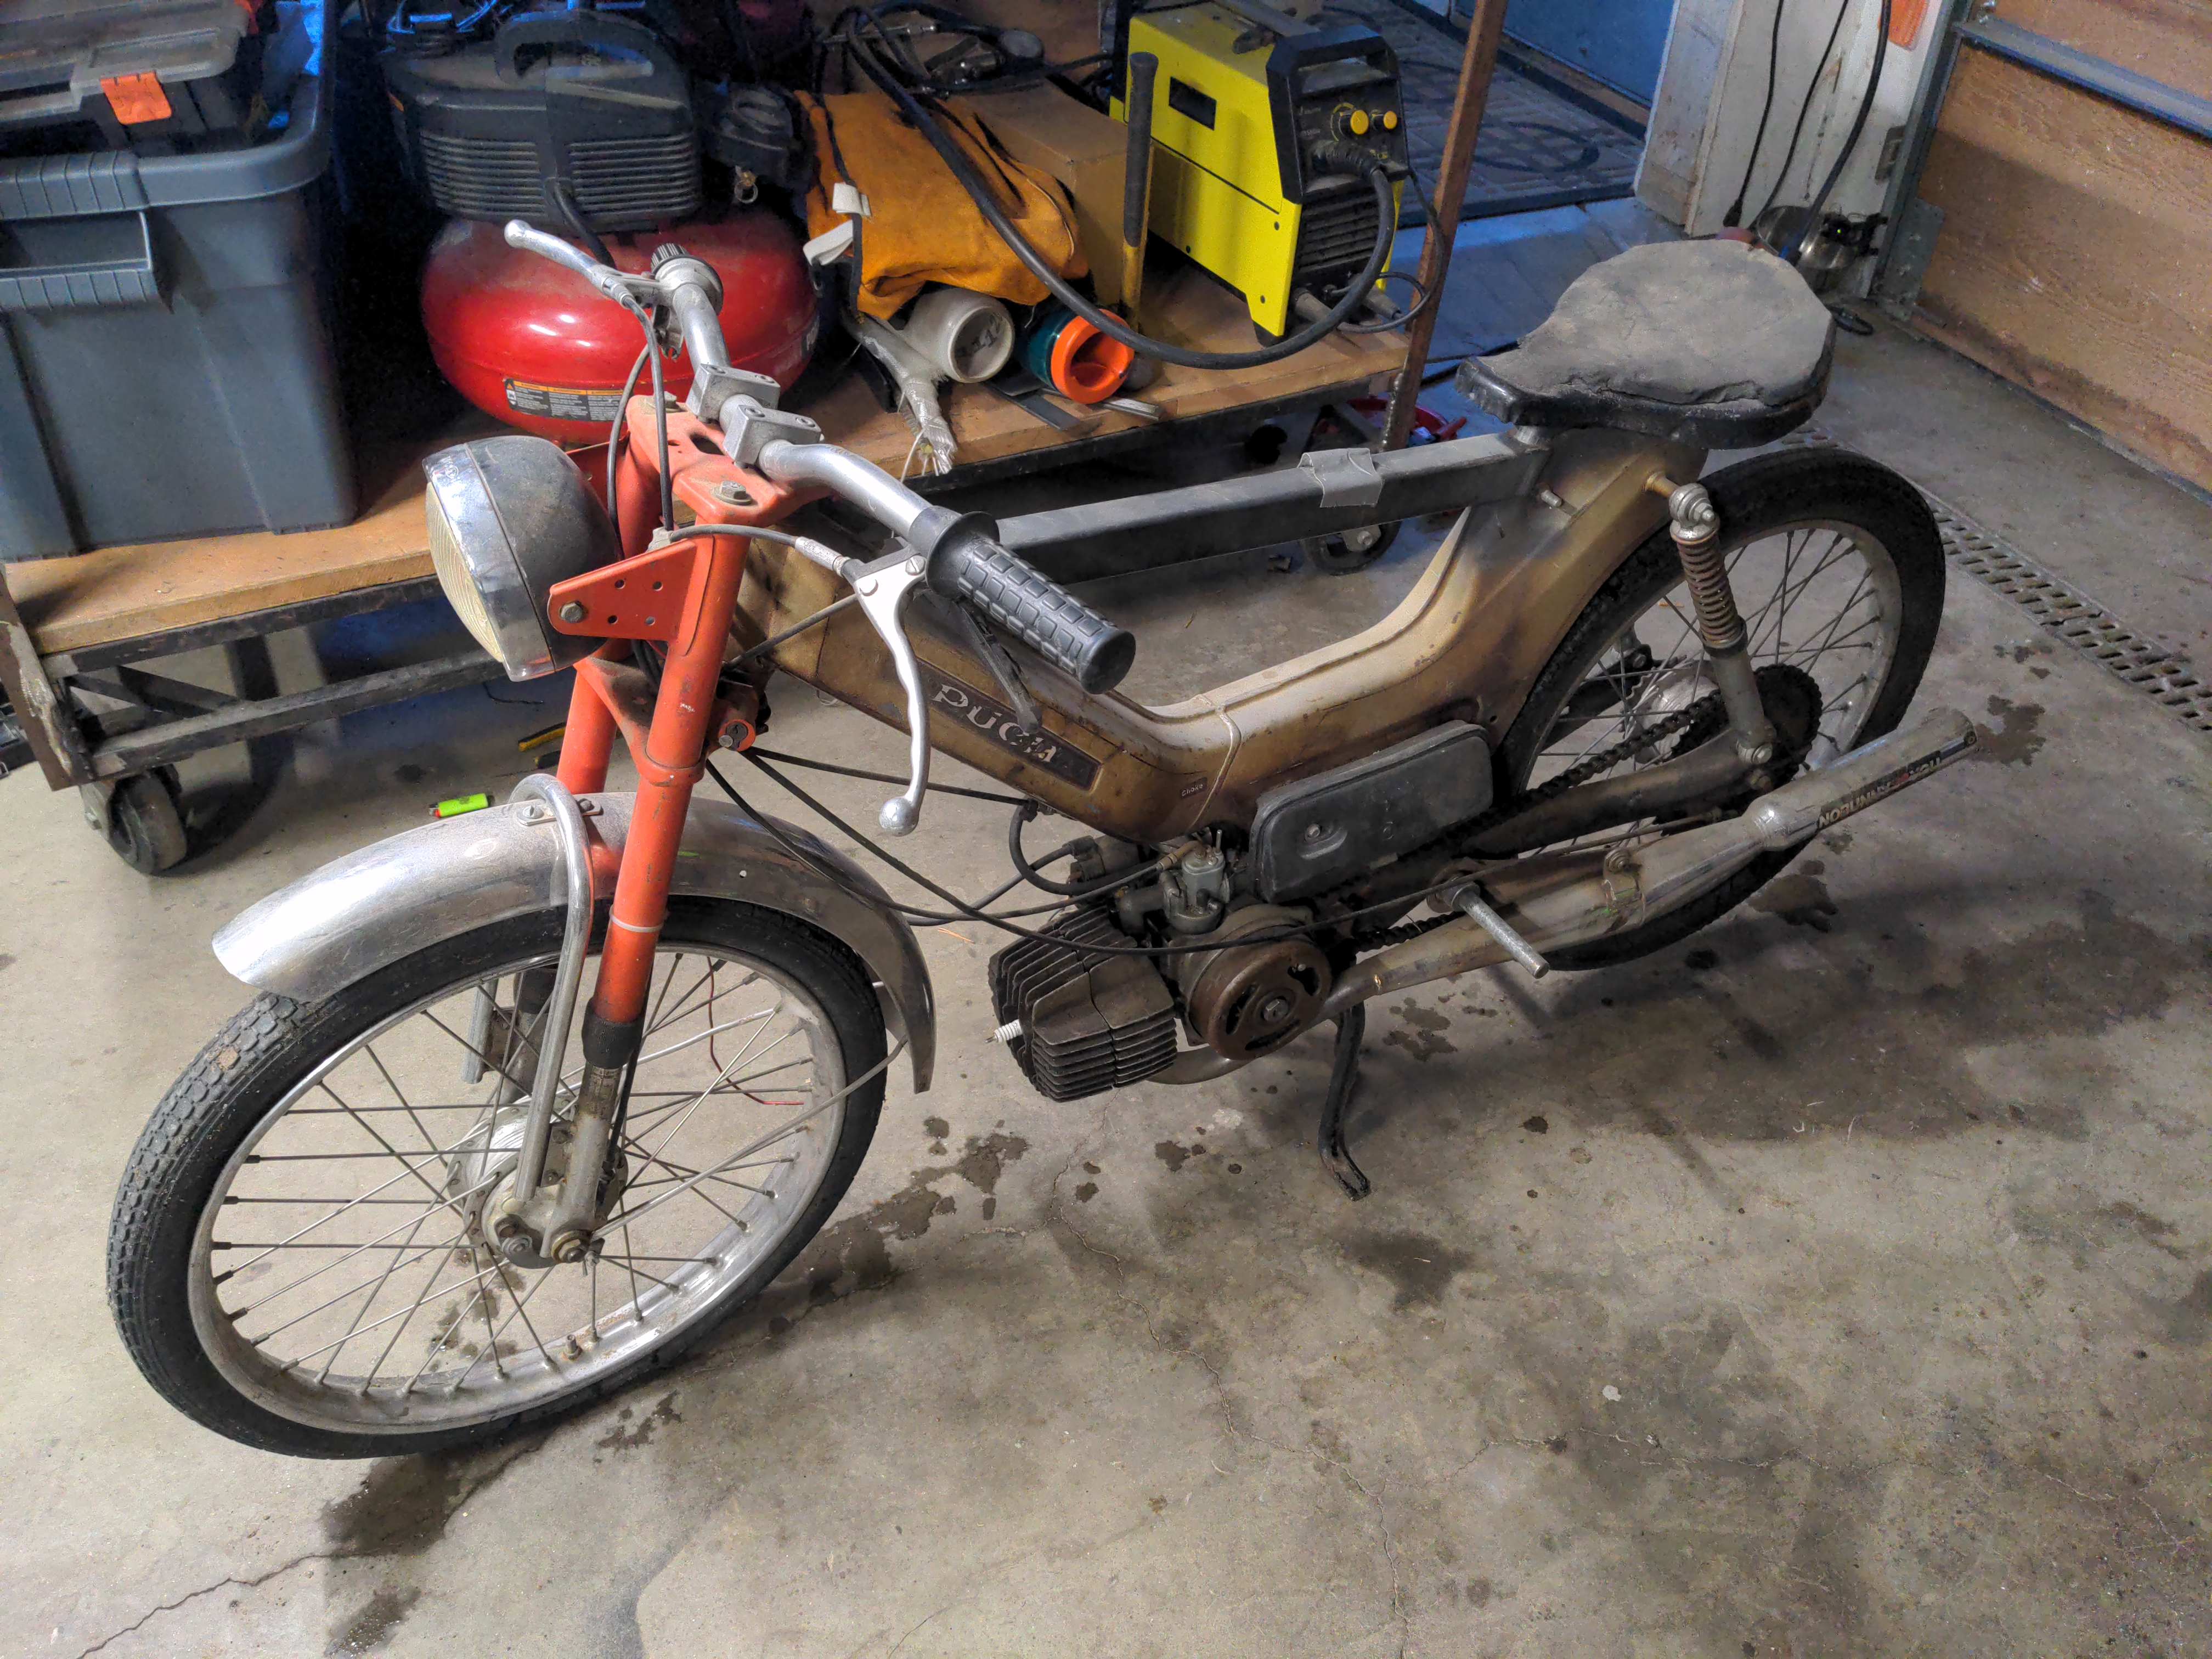 An old Puch moped sitting in a garage. The moped has already been modified with a long bar that runs front to back (presumably to attach equipment or add structural stability). The moped is clearly worn out, and lots of blemishes, rust, and grease spots are visible on what's left of the paint.